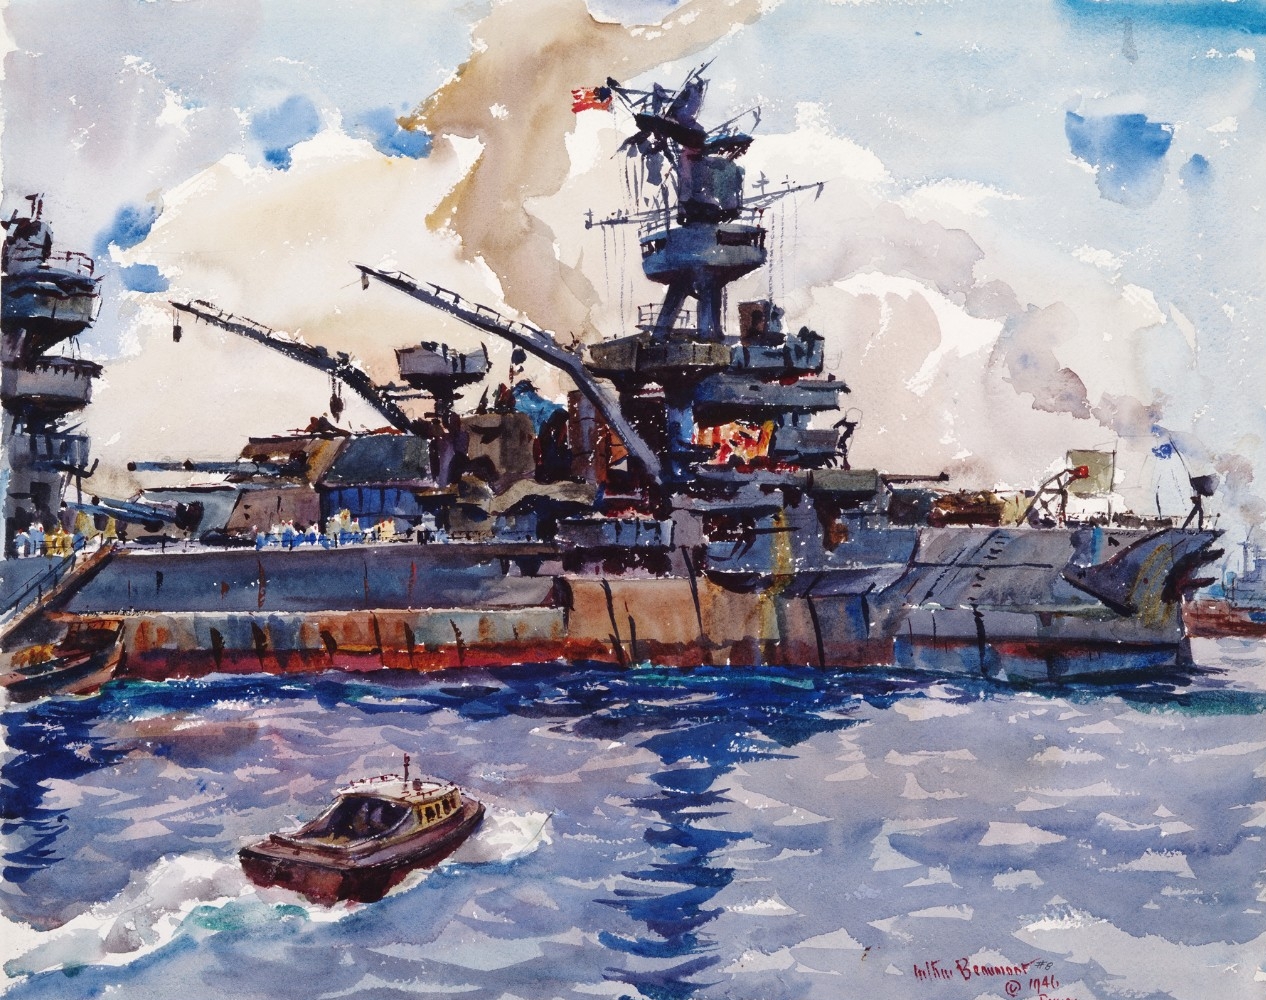 The first atomic bomb blasts Arkansas’ upper works during Event Able, 1 July 1946. The atmospheric detonation heavily damages the masts, superstructure, and deck. (Arthur Beaumont, Watercolor Accession No. 88-169-H, Naval History and Heritage Com...